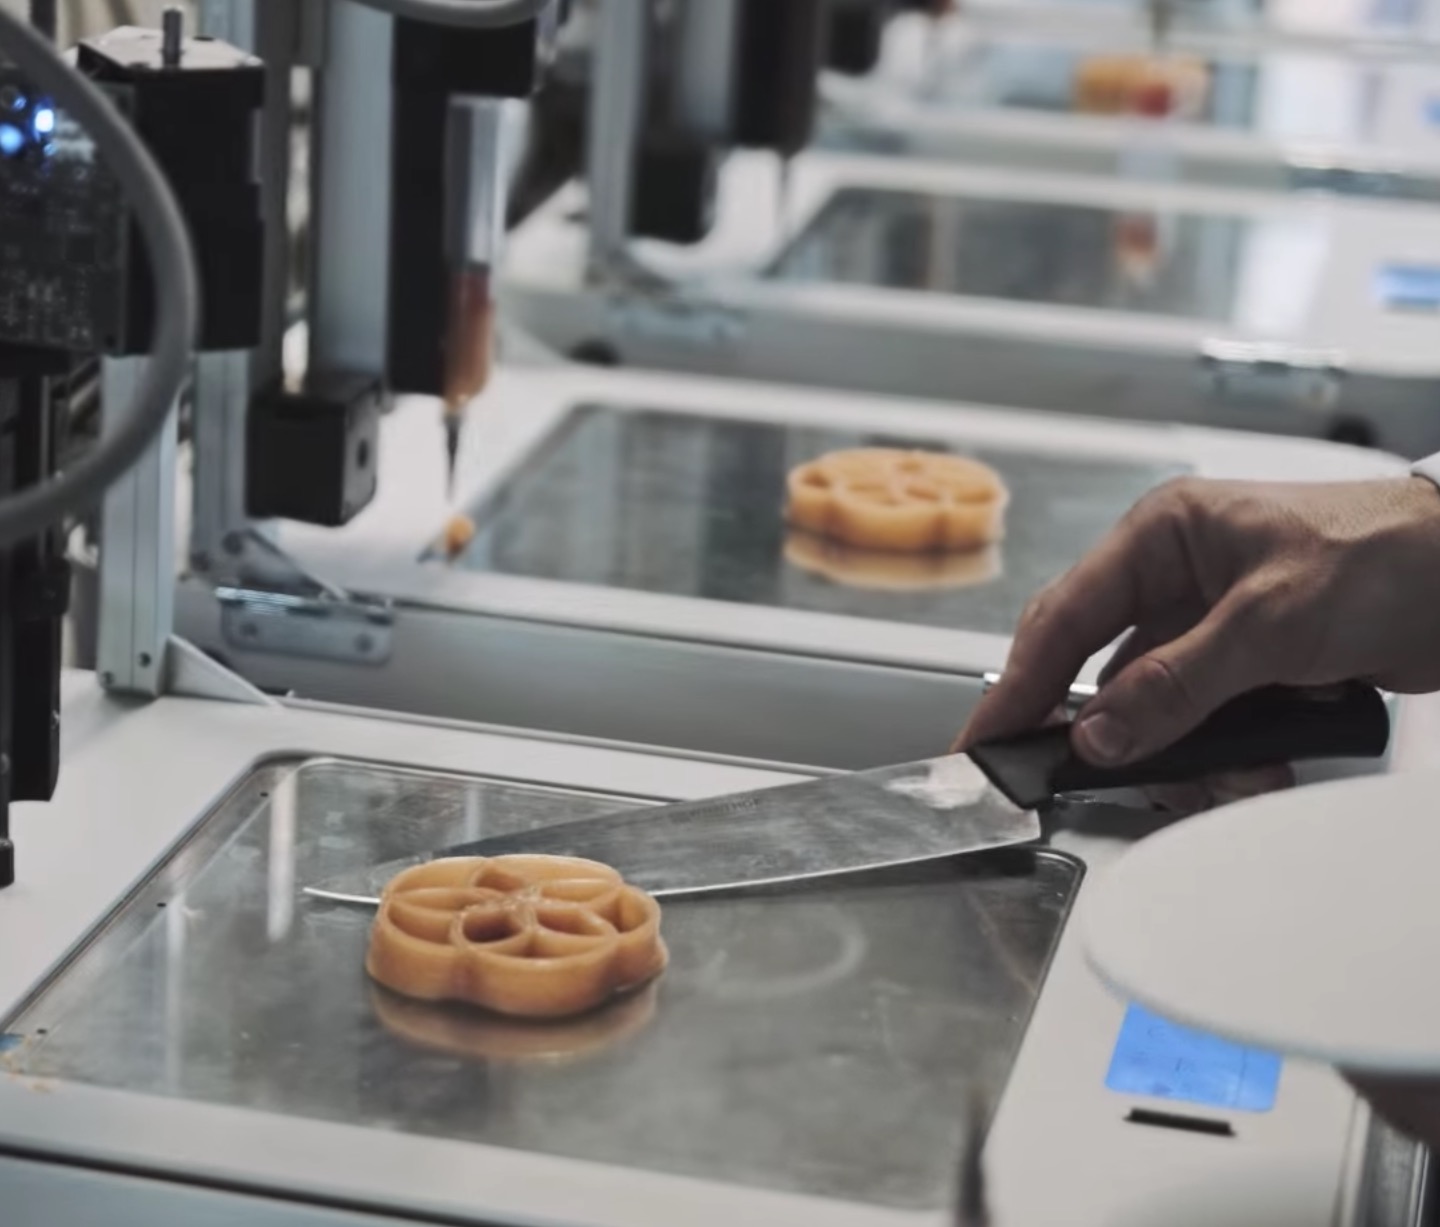  Removing a 3D printed food item from the machine 